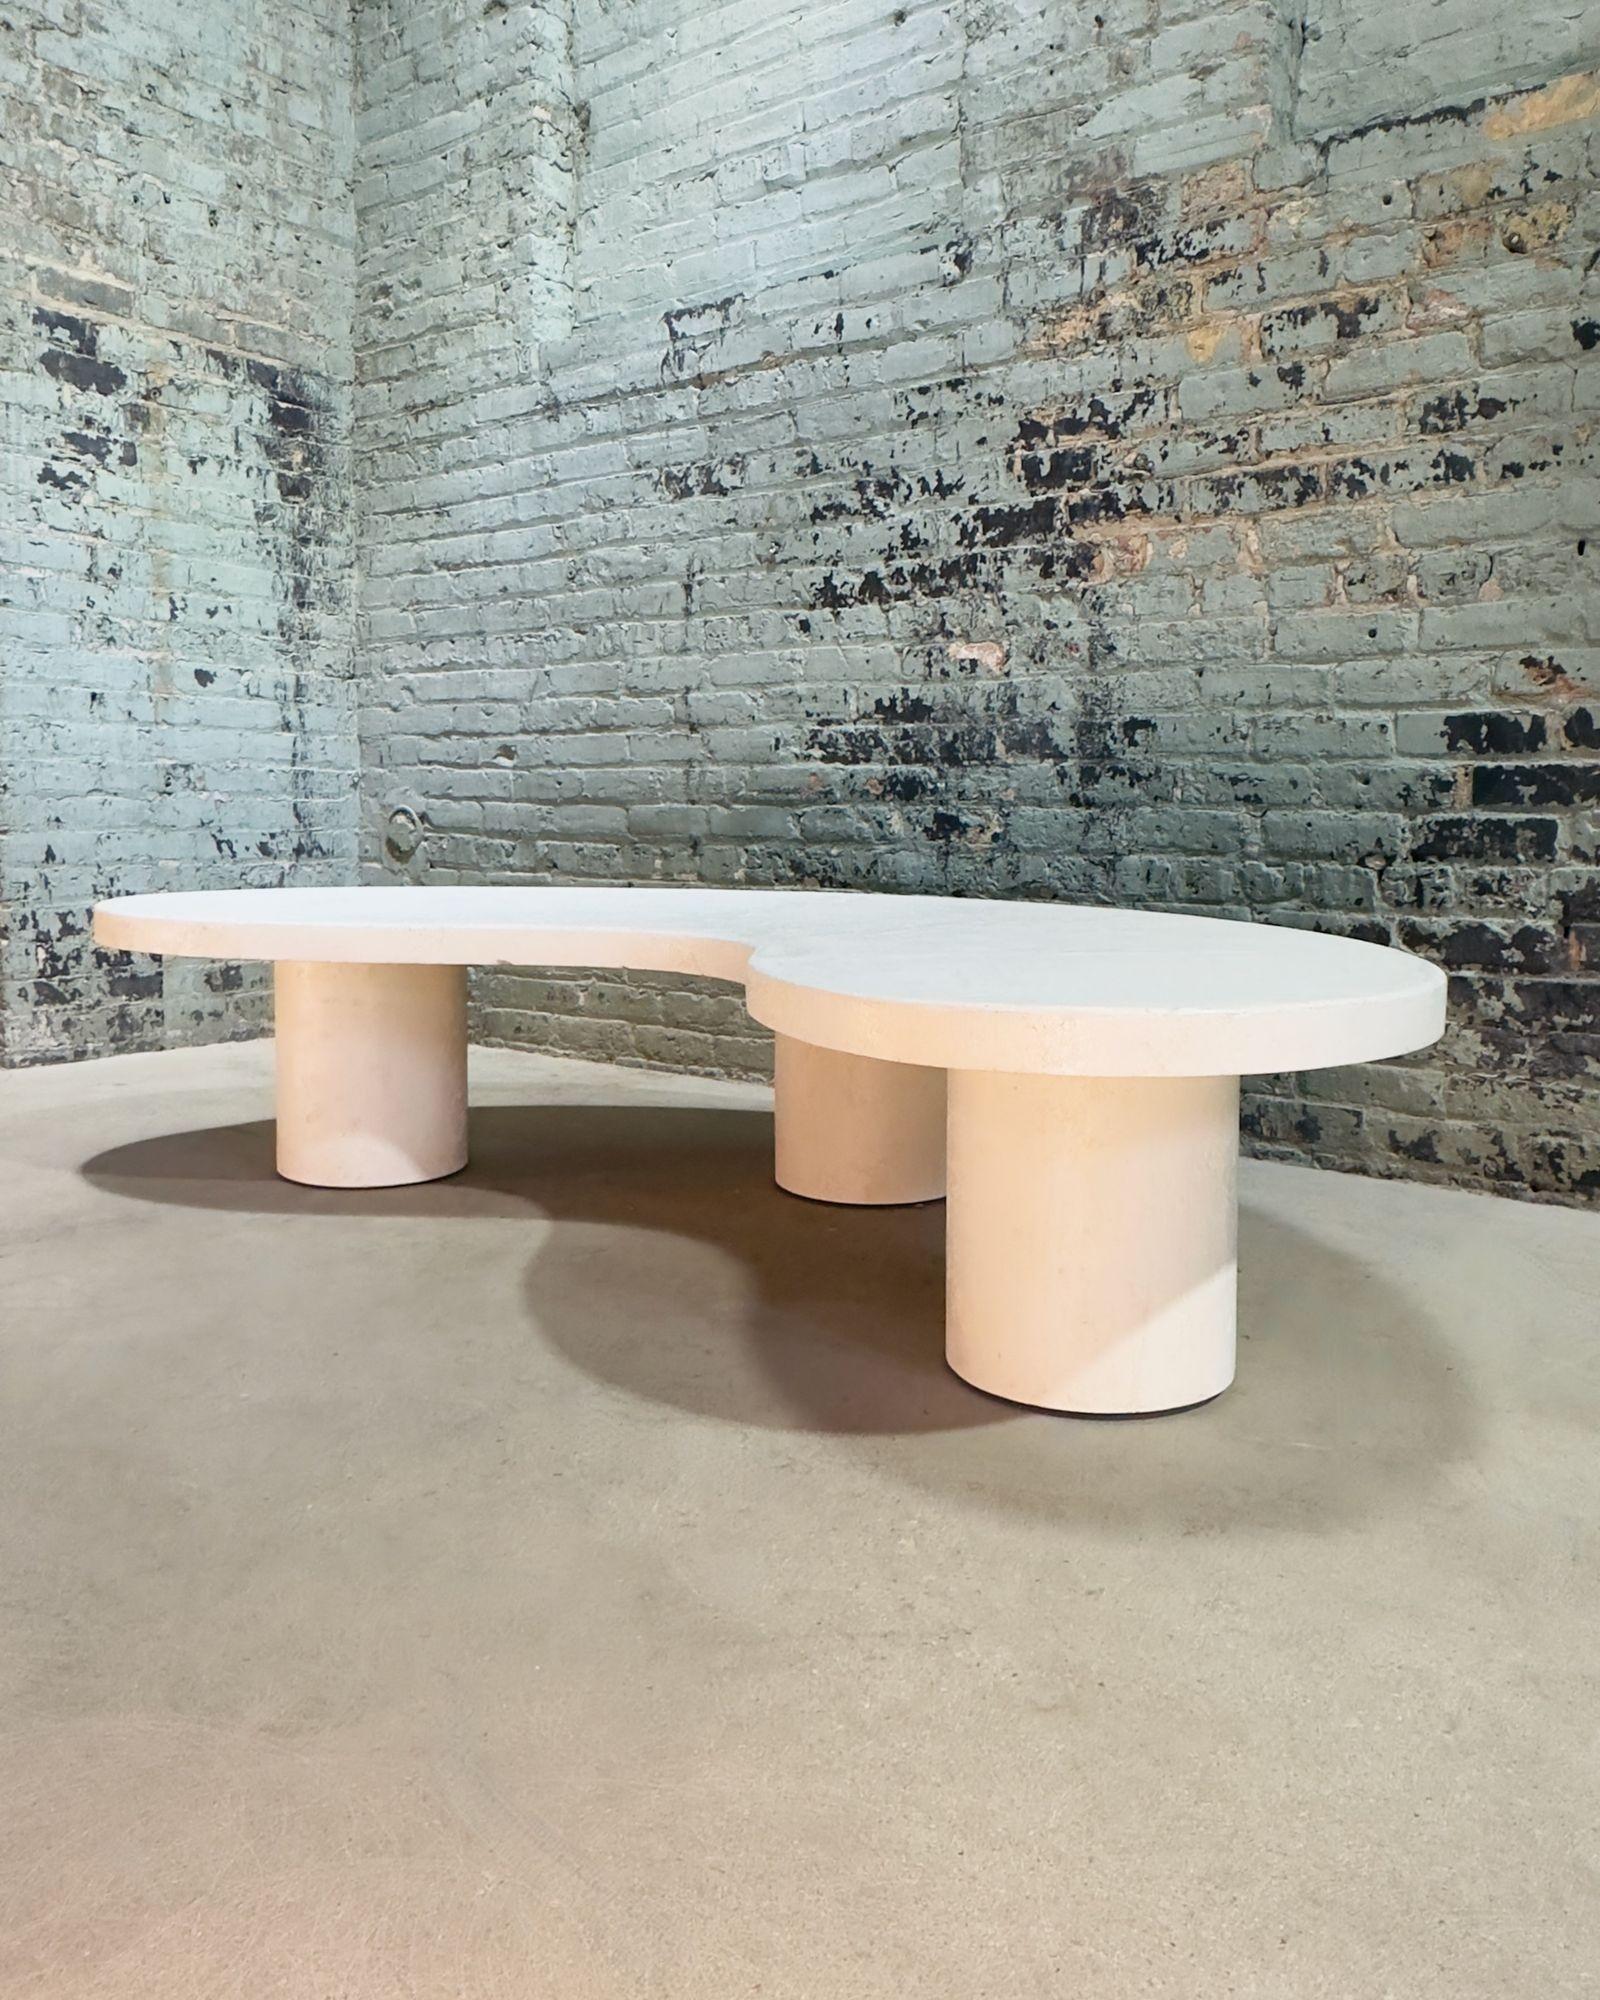 Post Modern Parra Plaster Molded Concrete Coffee Table, 1980. Original beautiful biomorphic coffee table.
Measures 70.5